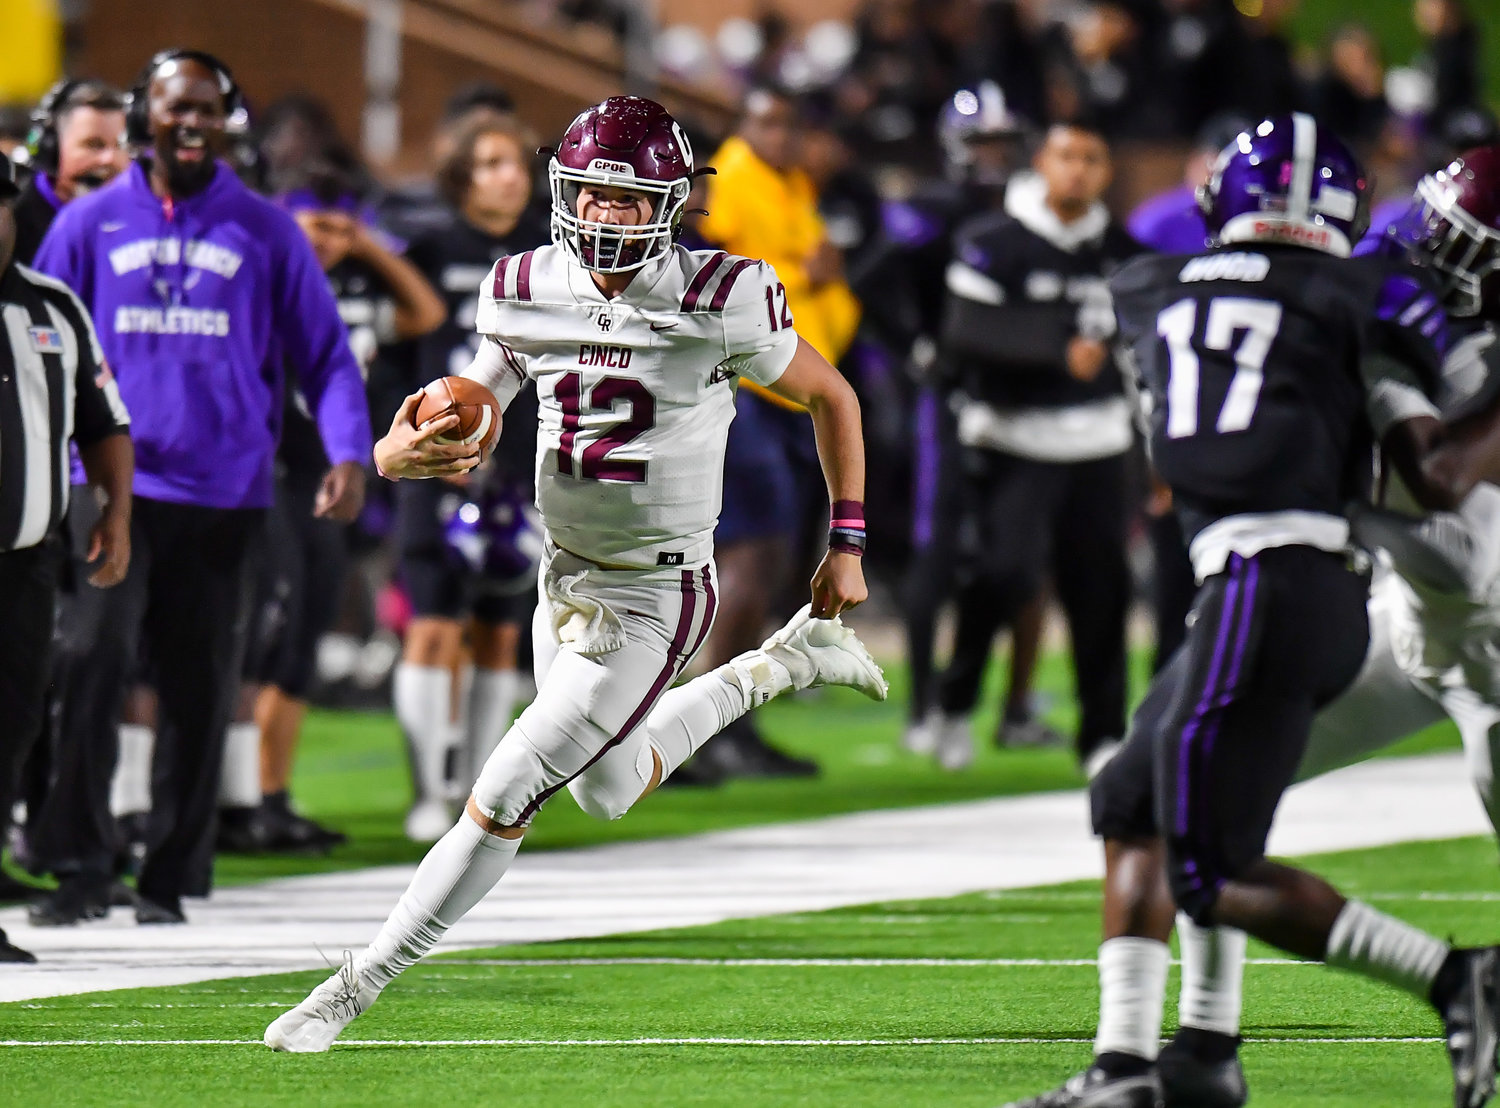 Katy, Tx. Oct 29, 2021: Cinco Ranch's QB Gavin Rutherford #12 carries the ball before being pushed out of bounds during a conference game between Cinco Ranch and Morton Ranch at Rhodes Stadium in Katy. (Photo by Mark Goodman / Katy Times)